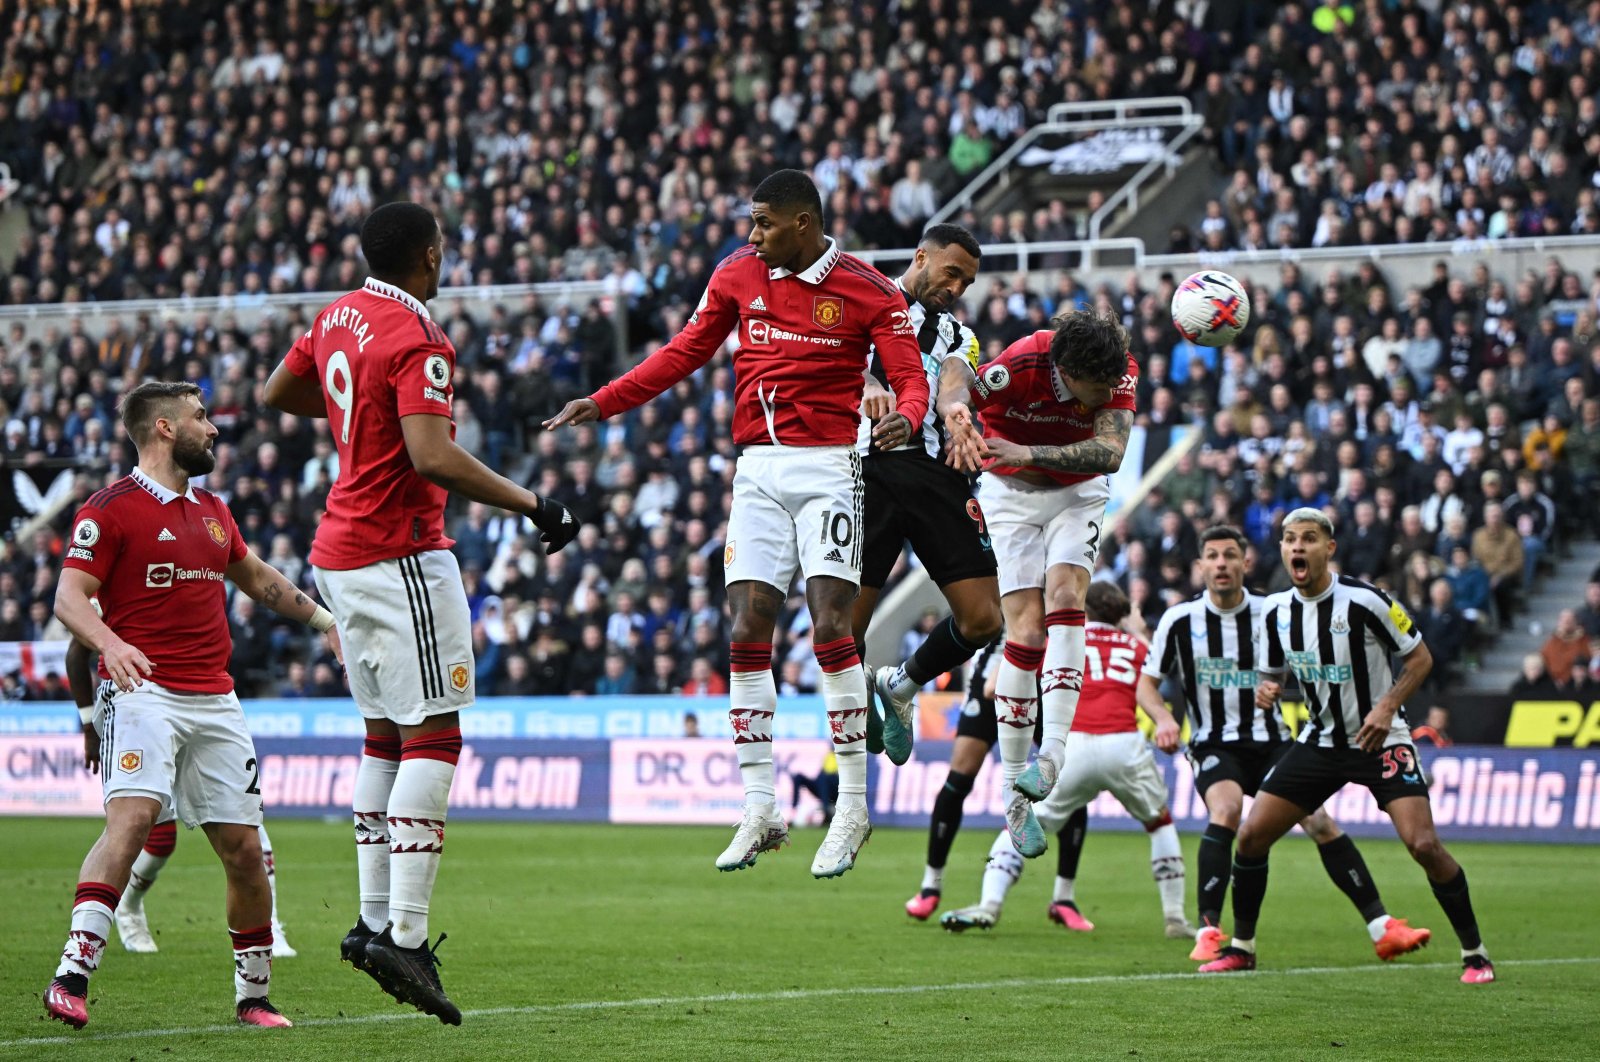 Blow for Man United as Newcastle upset casts doubt on top-4 spot